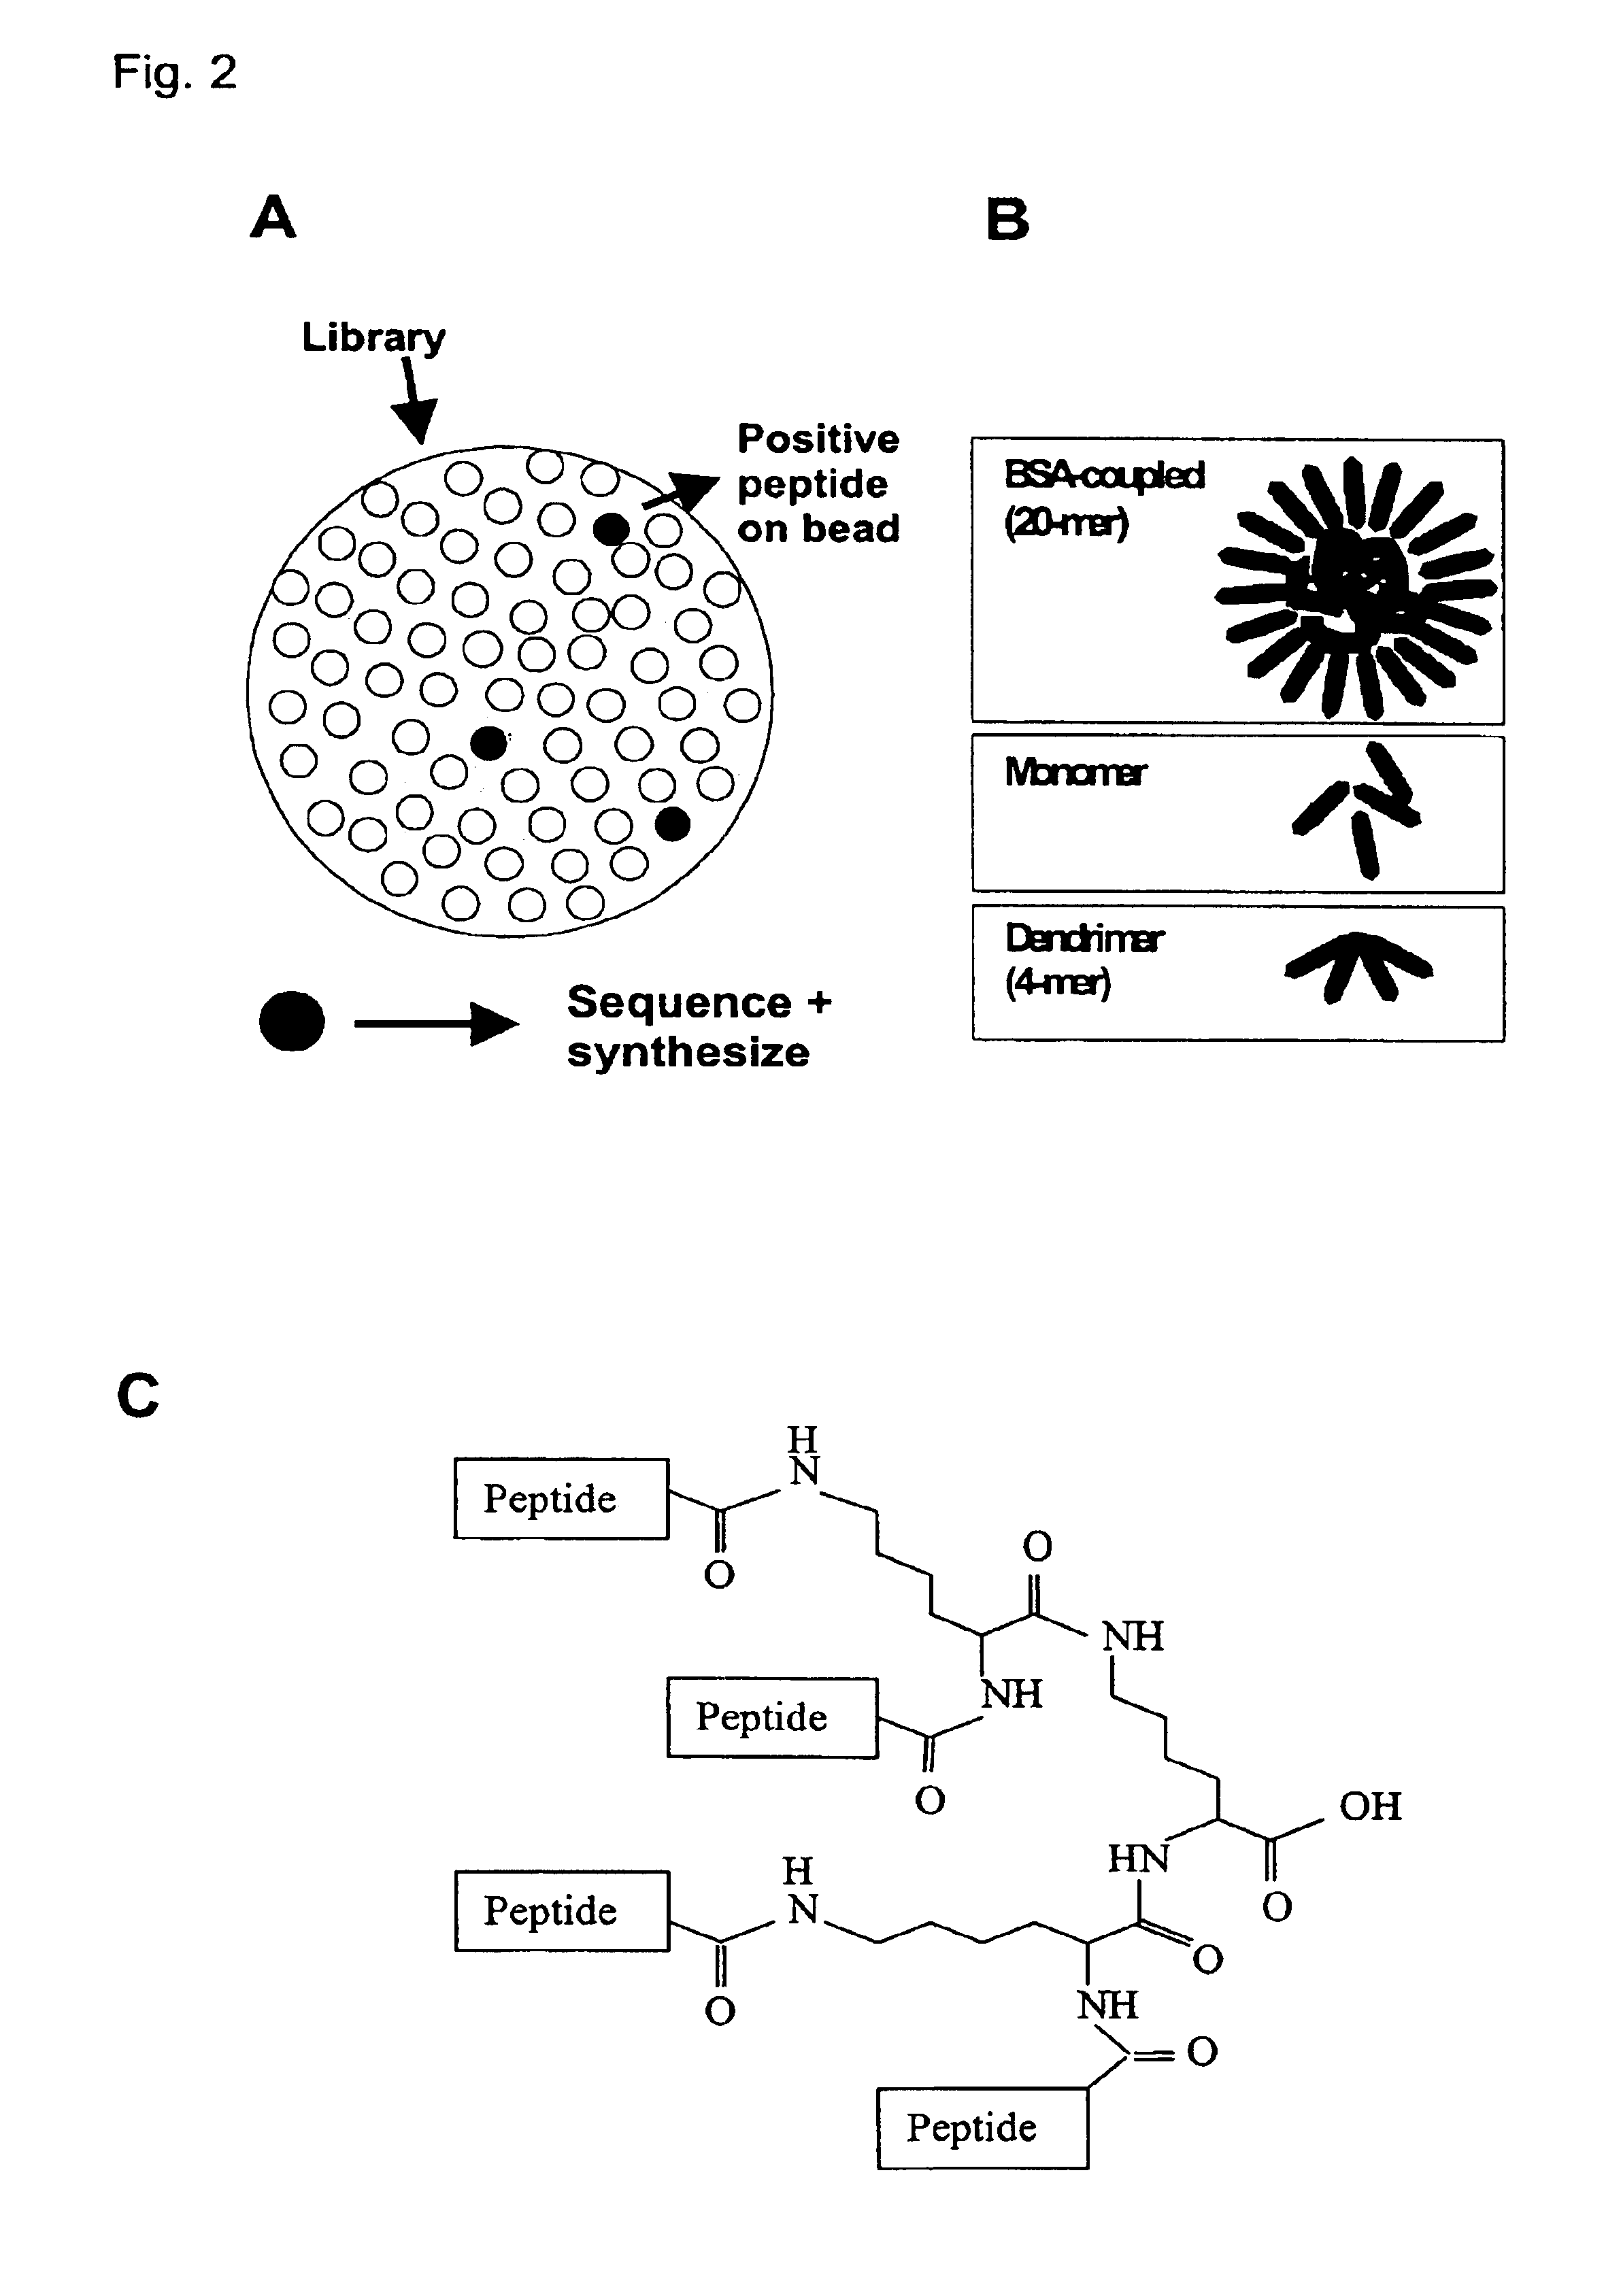 NCAM binding compounds